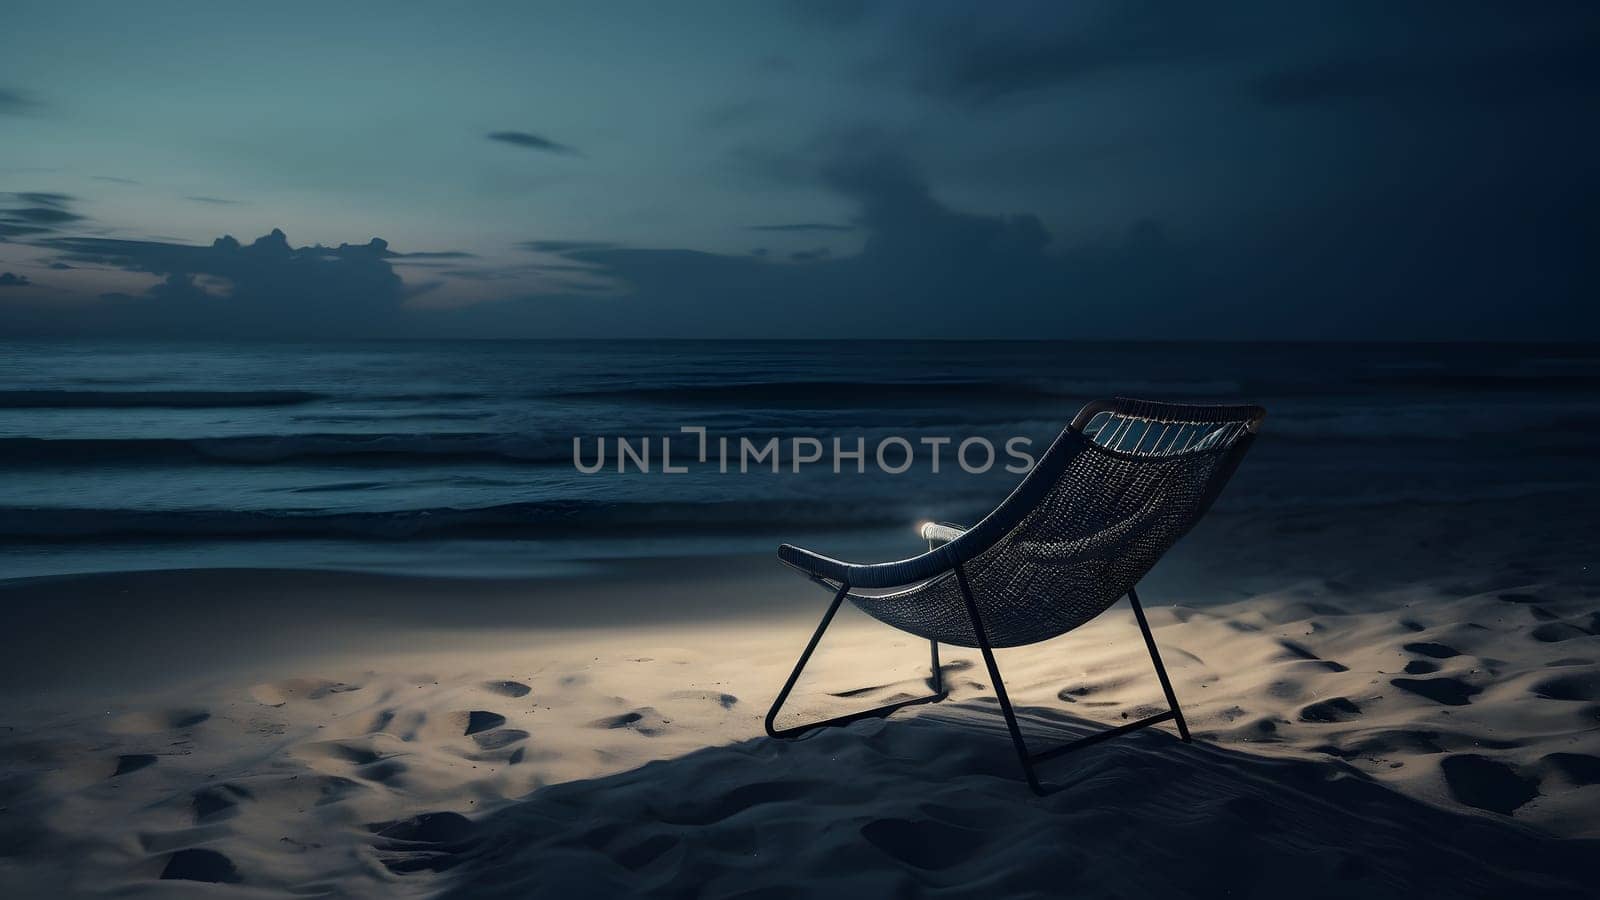 Empty beach chair on sand beach at night - summer vacation theme, neural network generated art by z1b